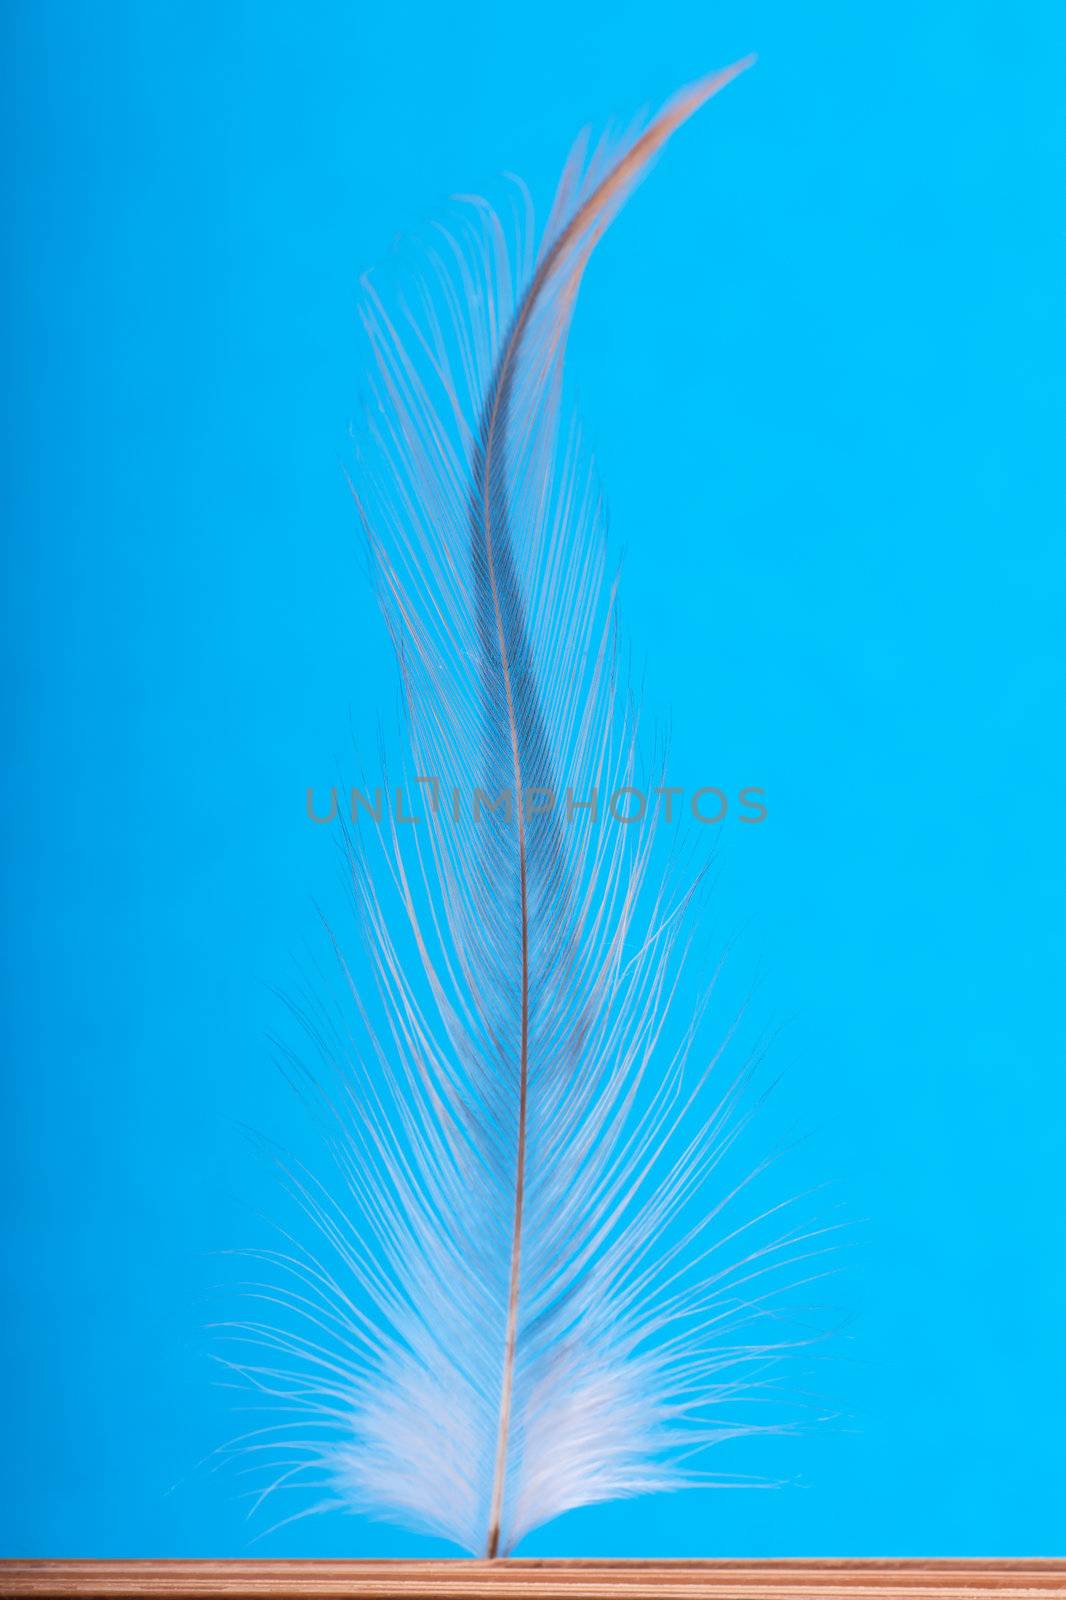 Closeup view of a feather on a blue background